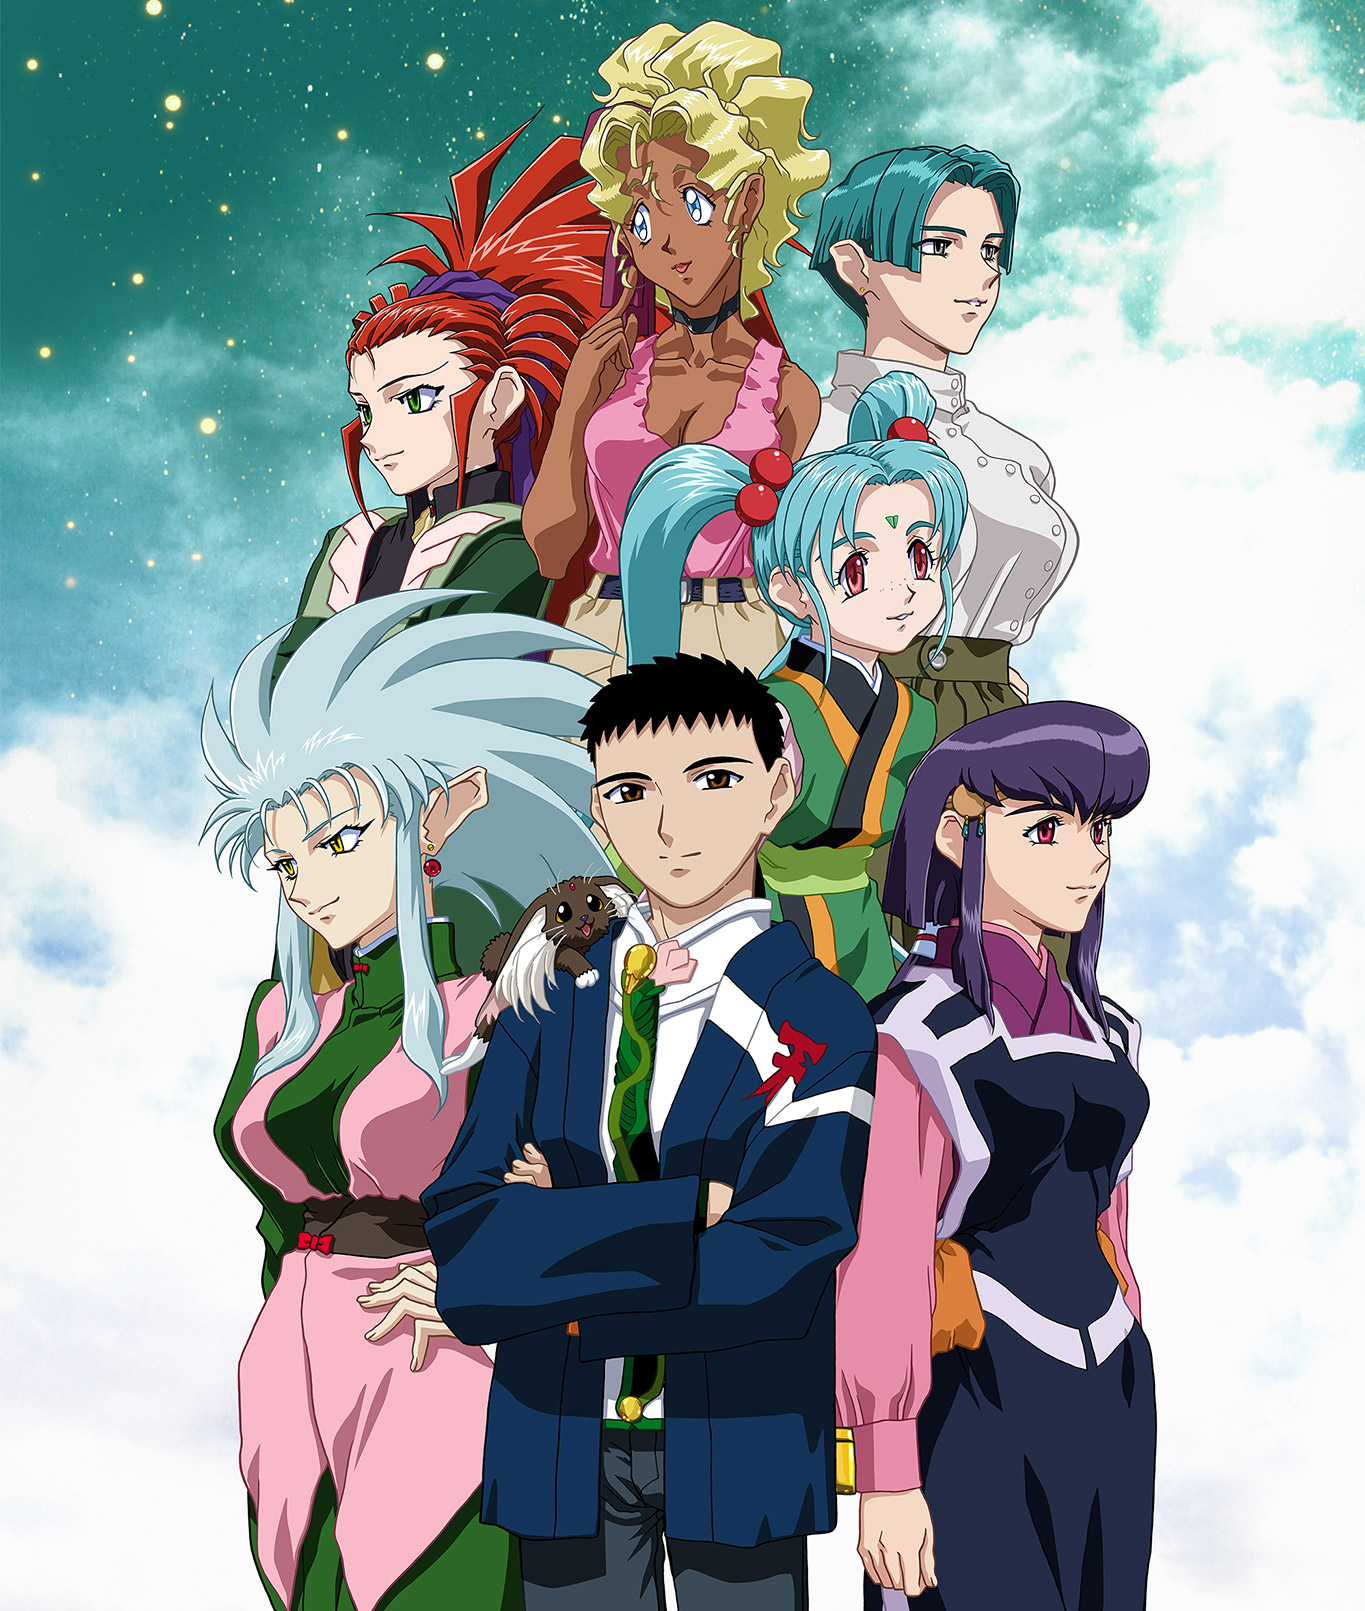 A Guide to Tenchi Muyo: One of the First Harem Anime – OTAQUEST